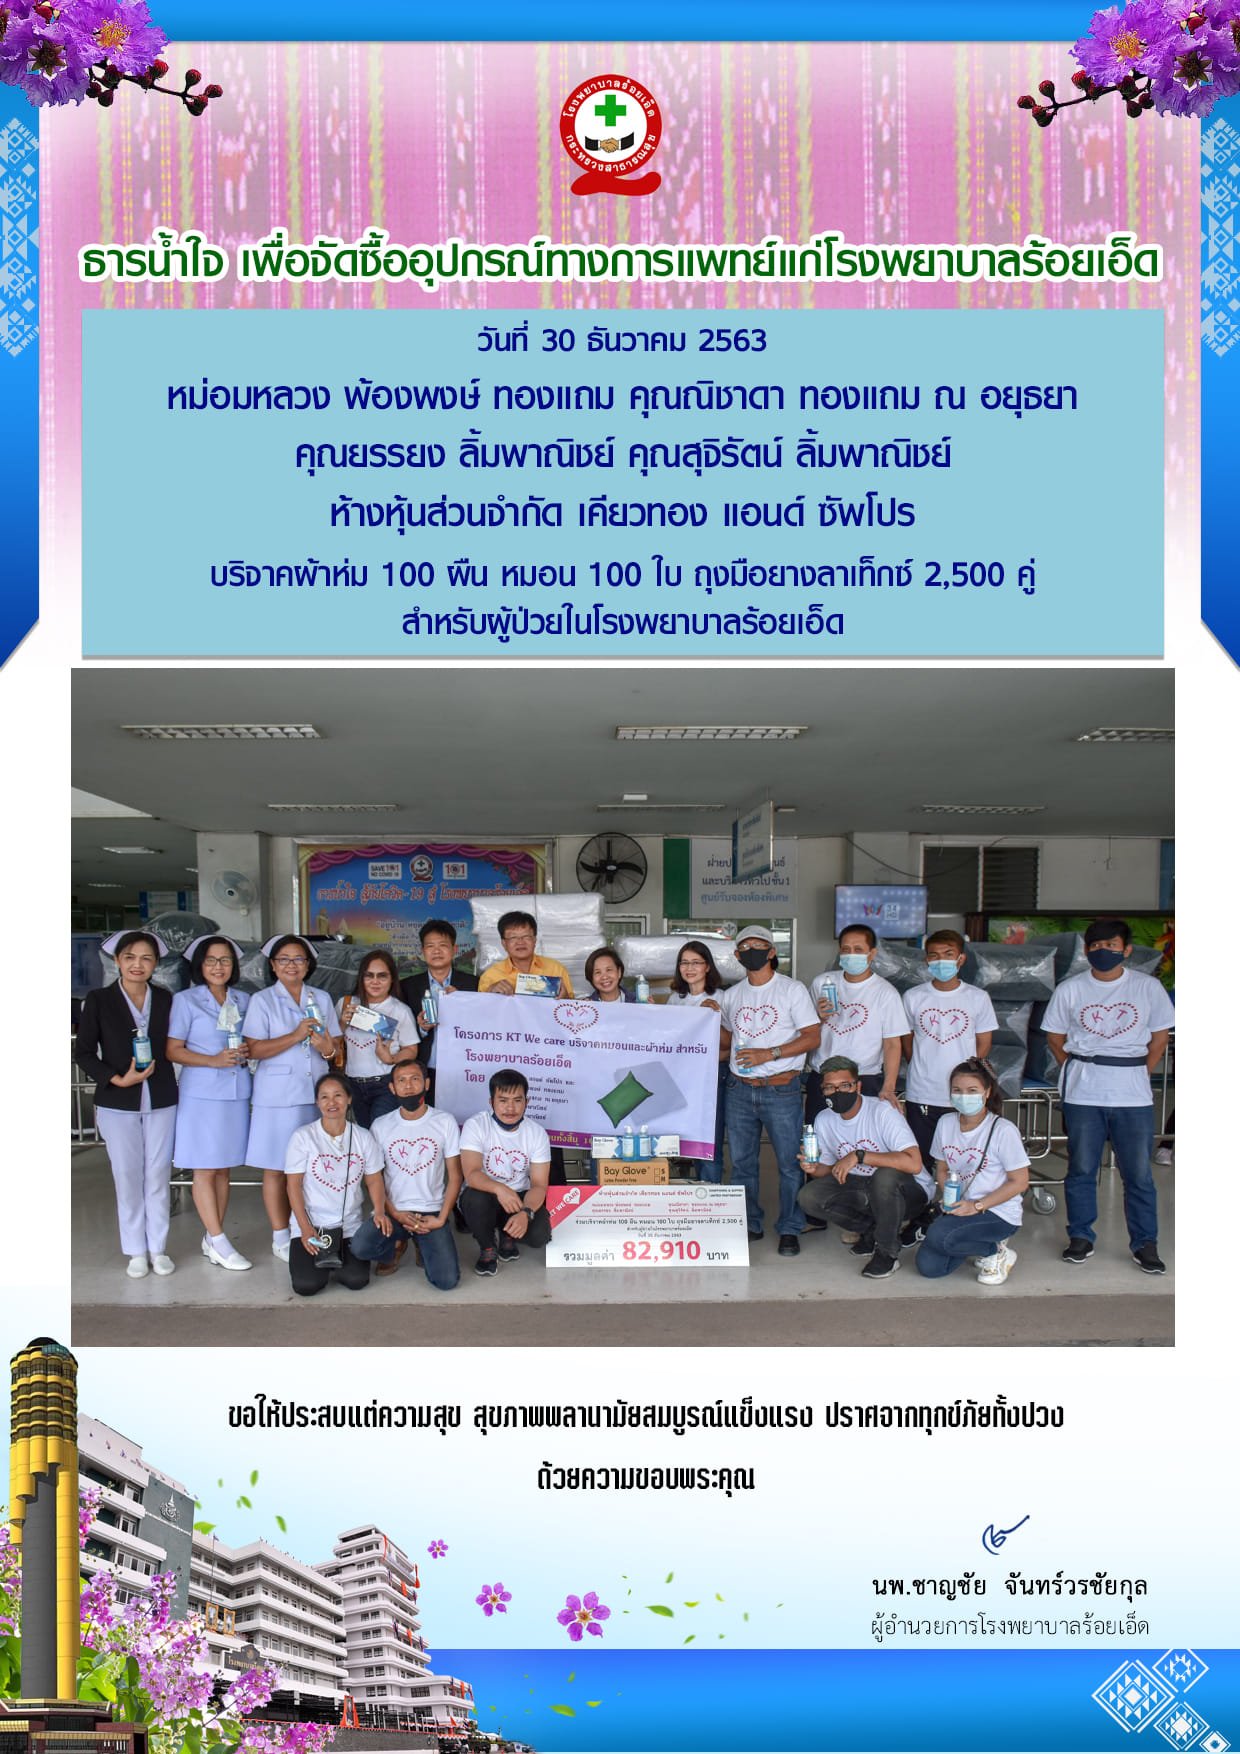 Donate pillows and blankets at Roi Et Hospital